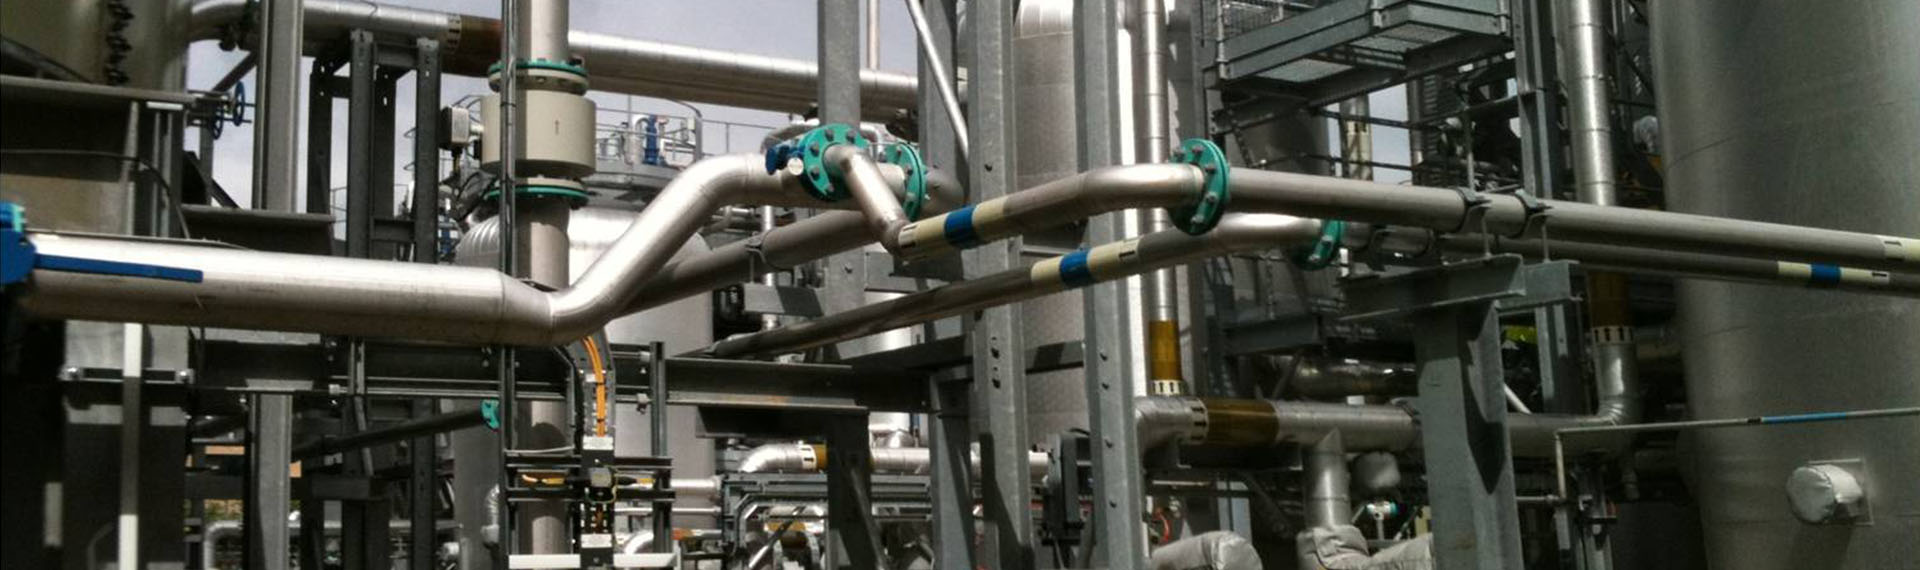 edwards elite engineering wirral cheshire merseyside design steel fabrication pipes pipework